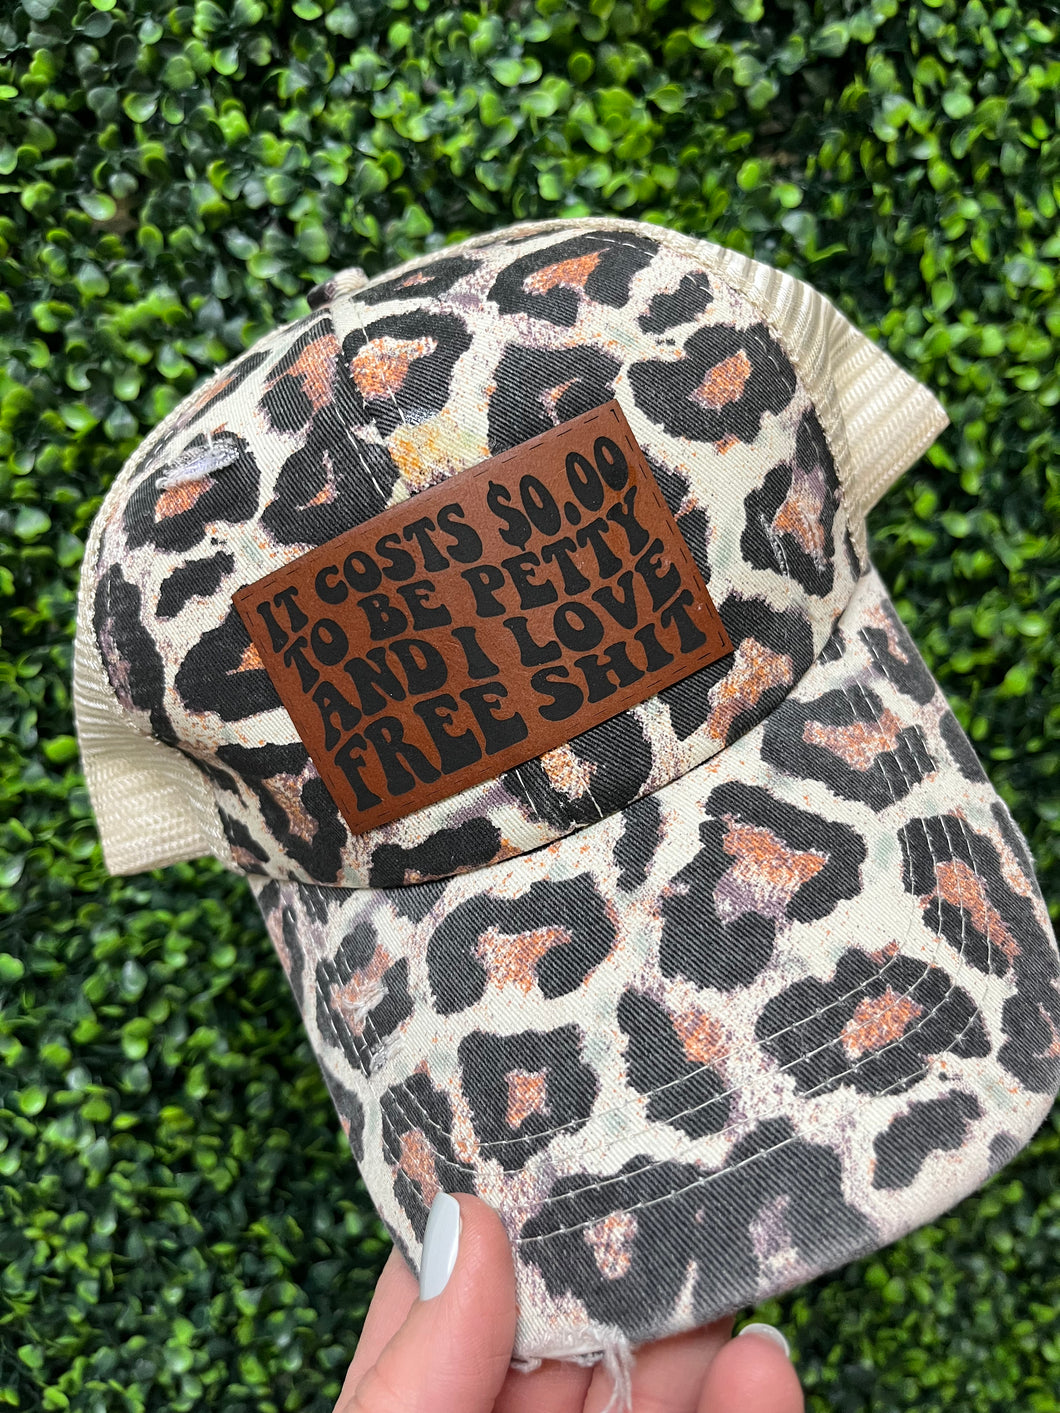 It costs $0.00 to be petty & I love free shit leather patch beanie/hat